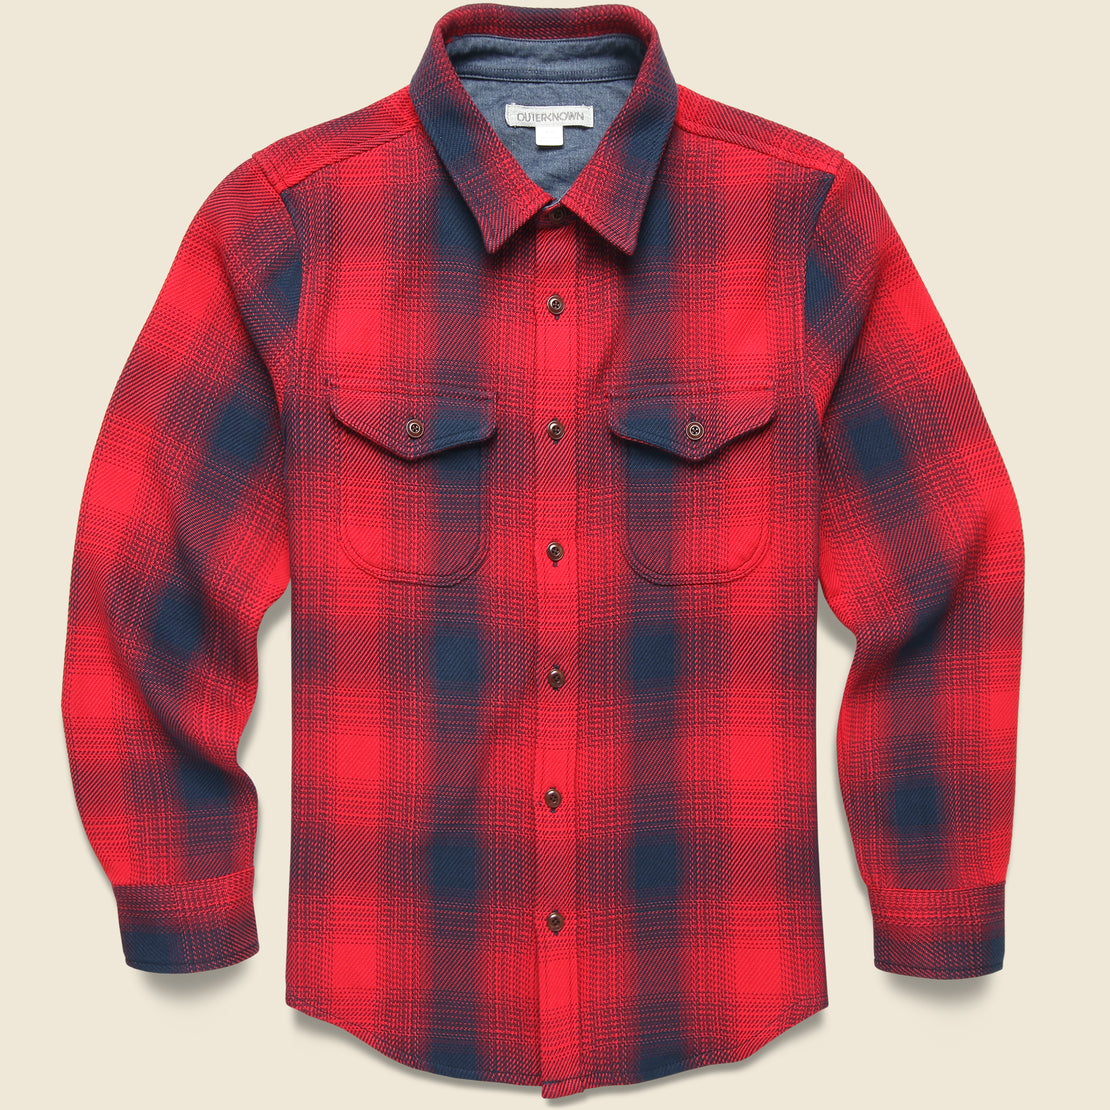 Outerknown Blanket Shirt - Safety Red Overlook Plaid